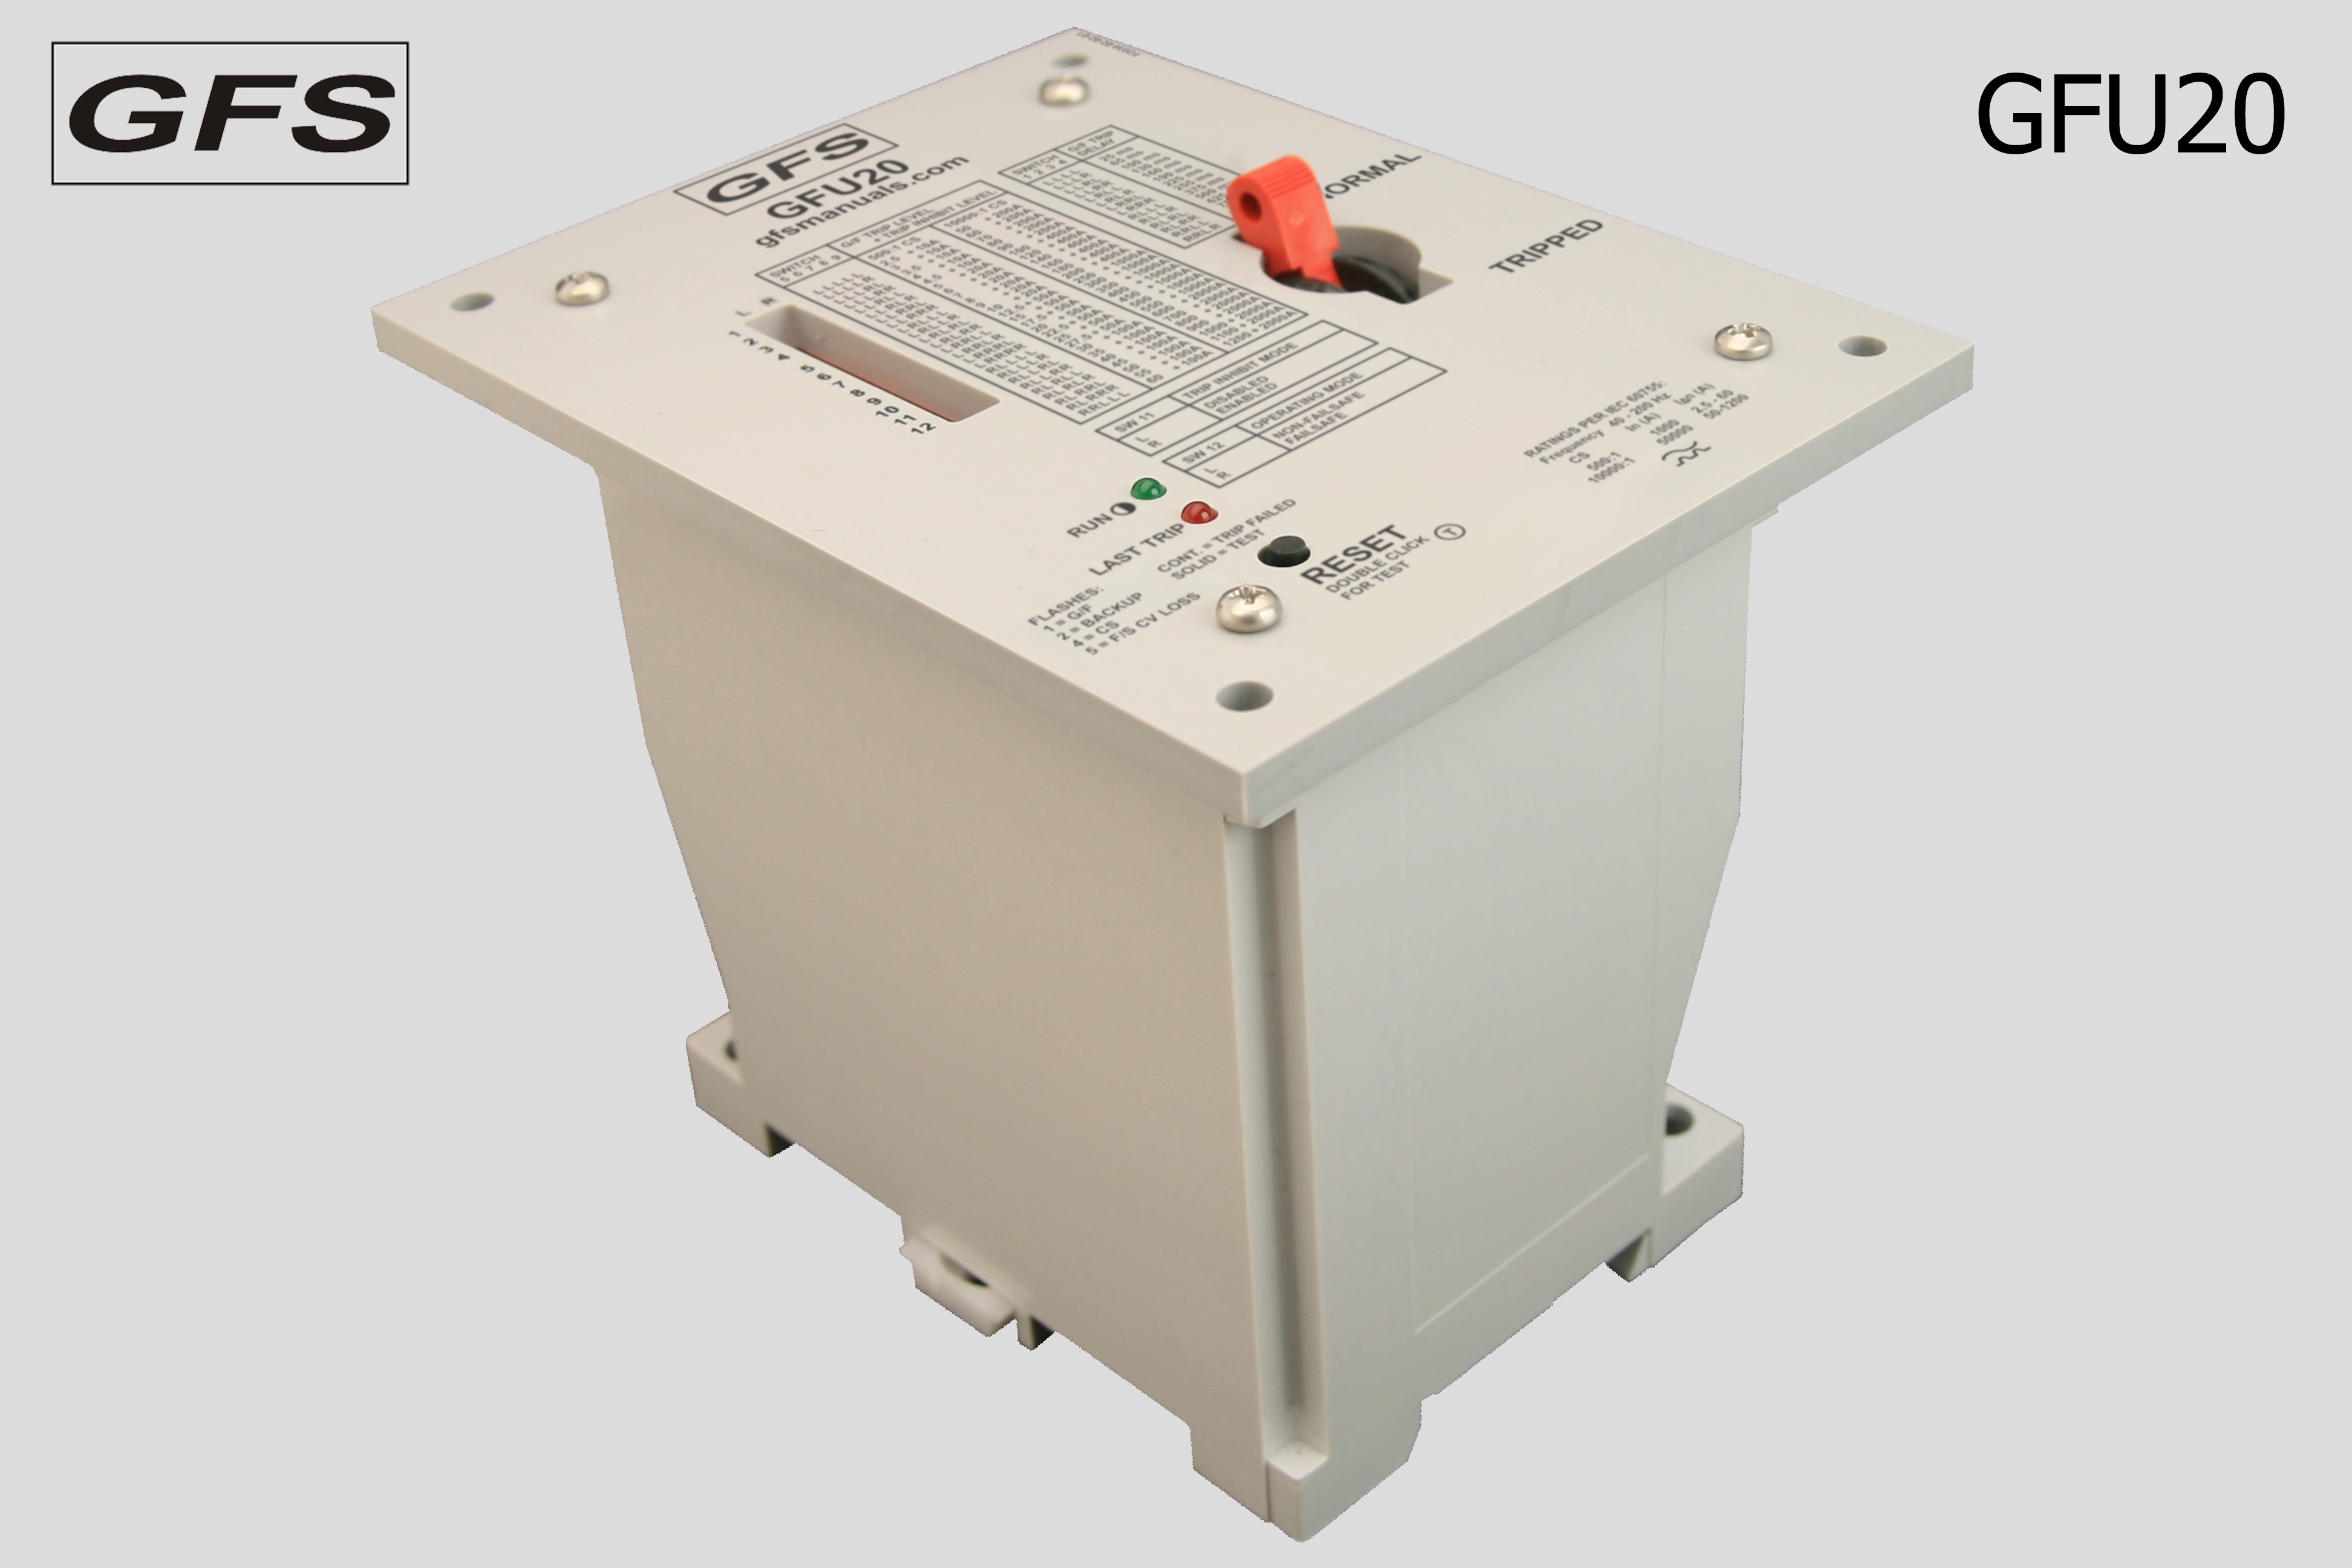 Ground Fault protection unit: GFU20